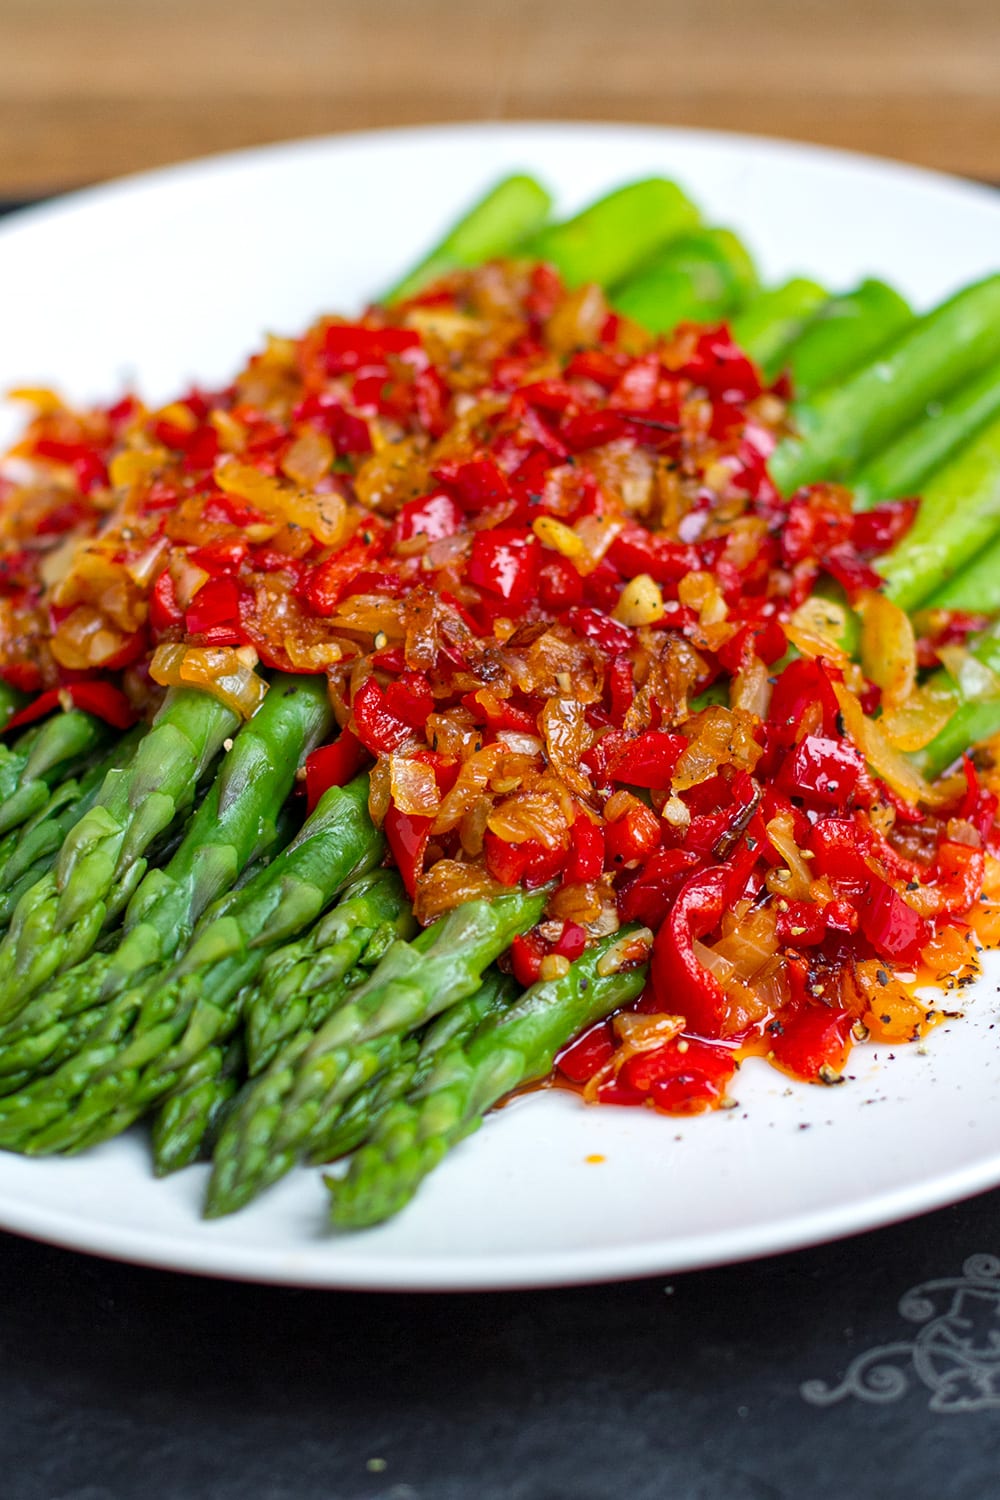 Asparagus Recipe With Bell Peppers, Onions & Garlic